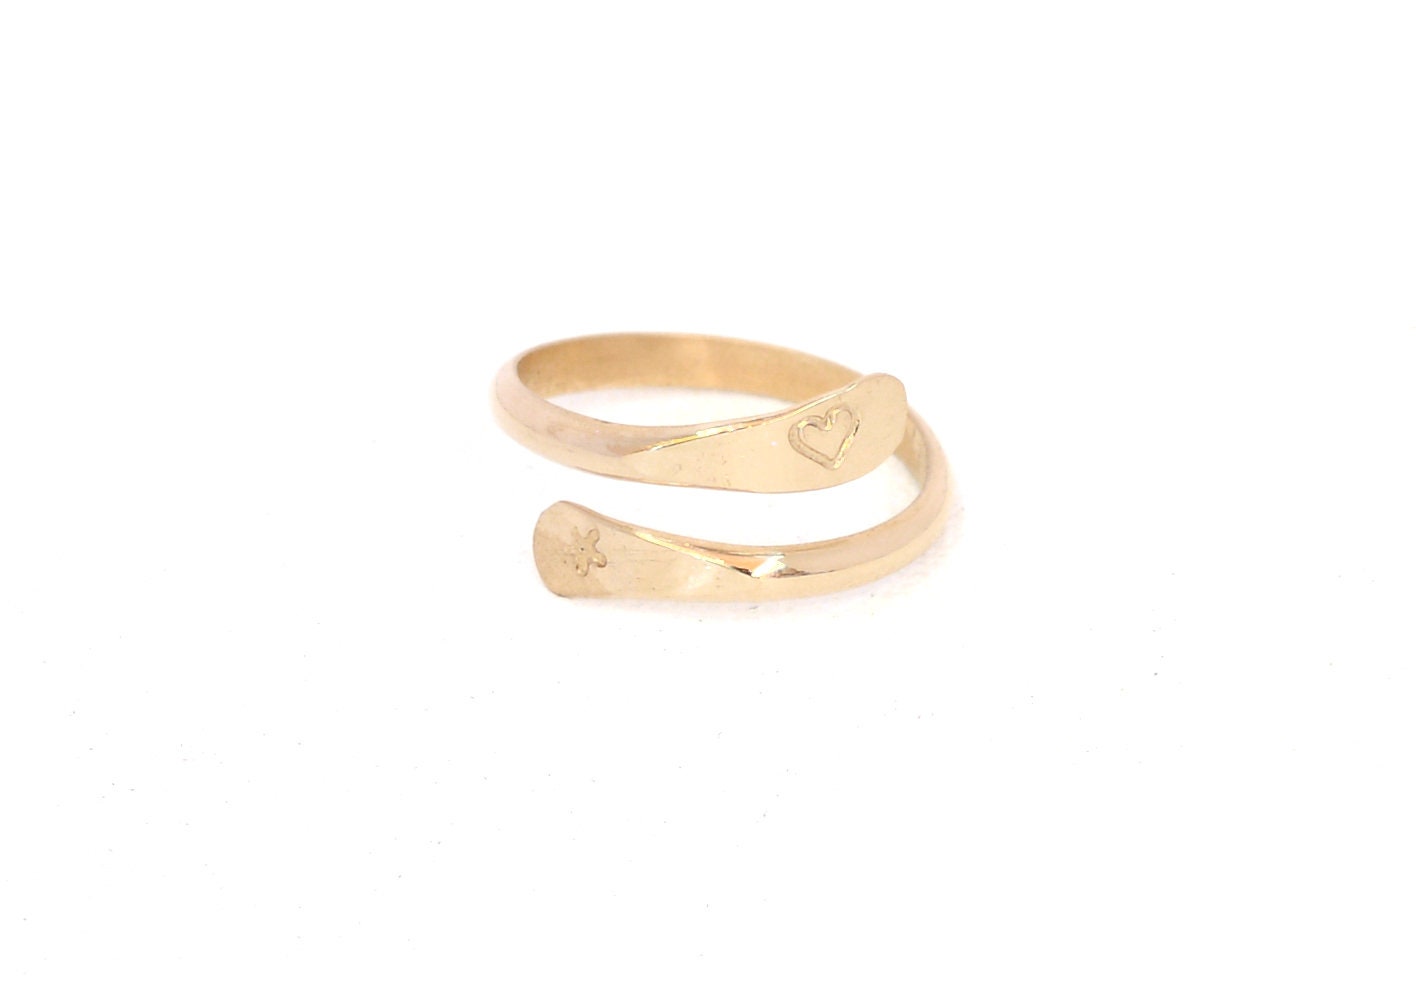 14k solid Gold Wrap Ring with Forged Ends and Engraved Symbols aka Twist Ring, Bypass Ring